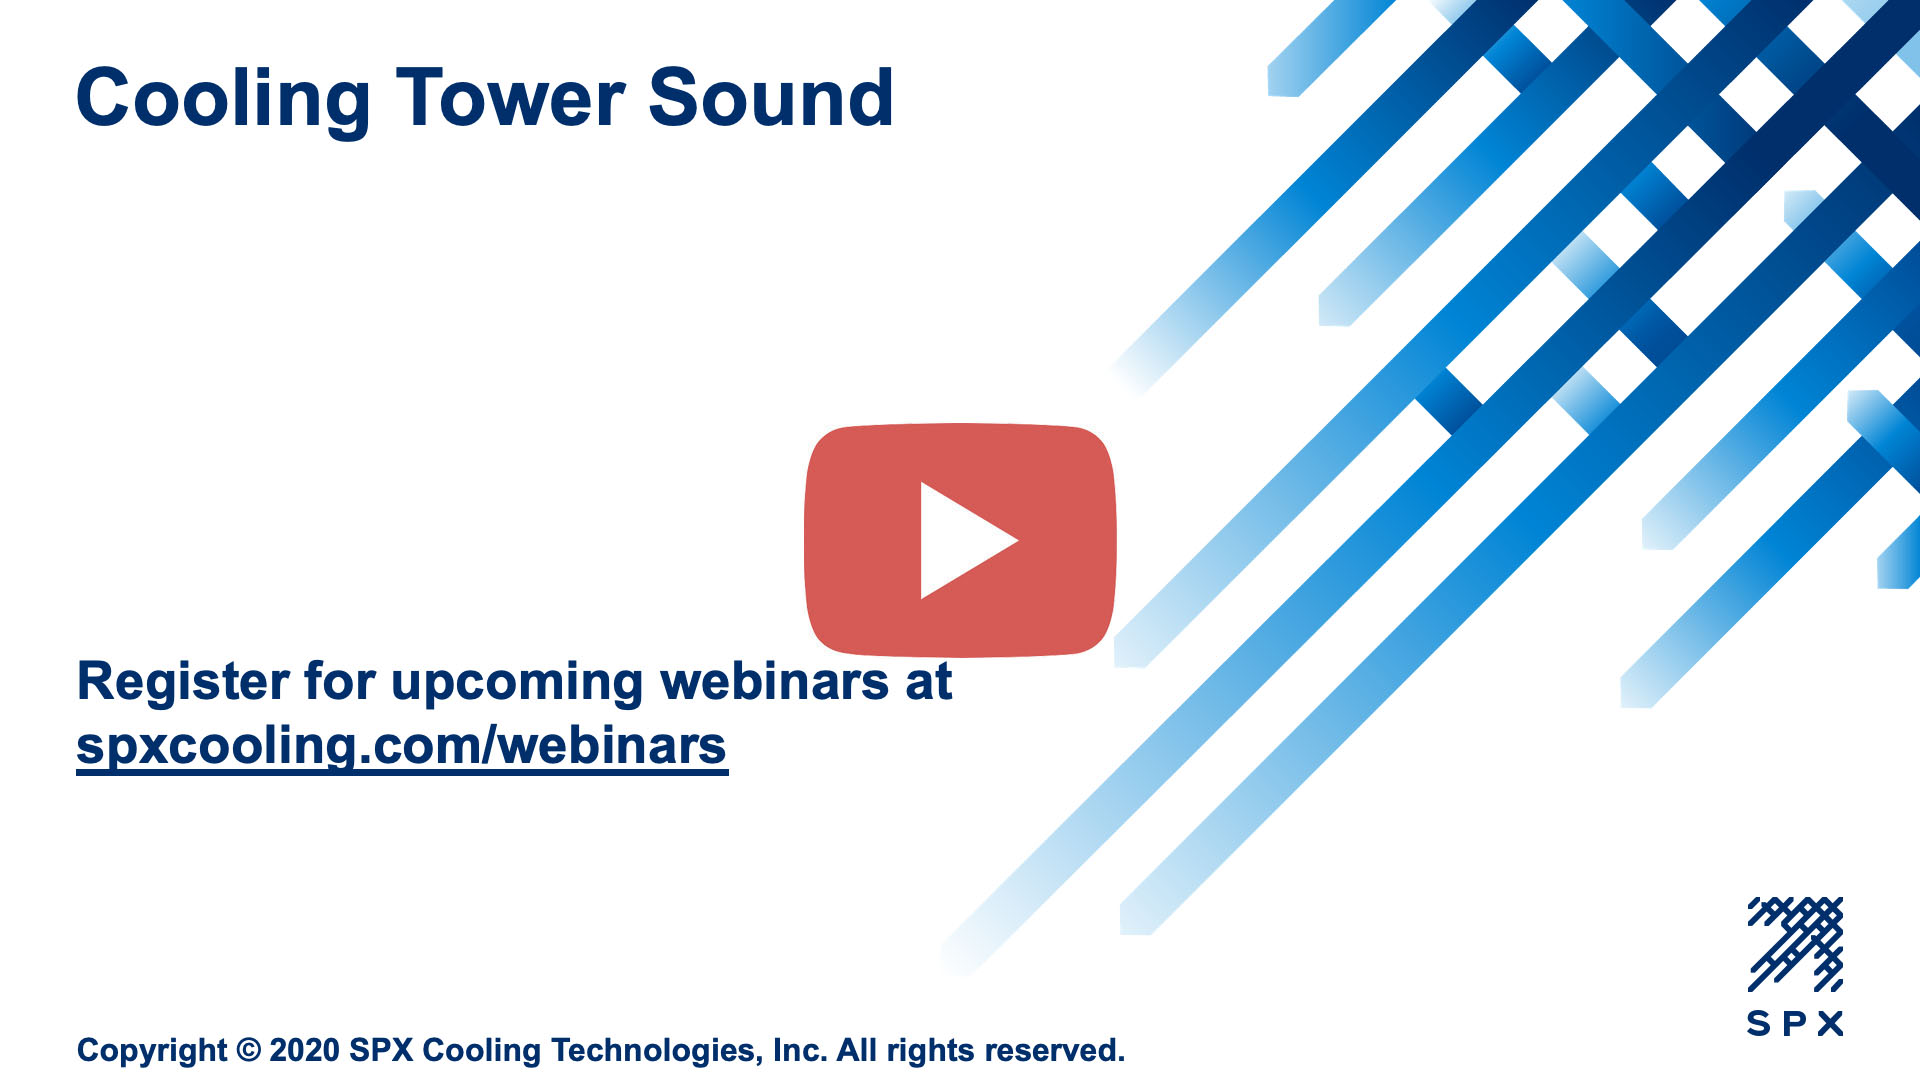 Cooling Tower Sound